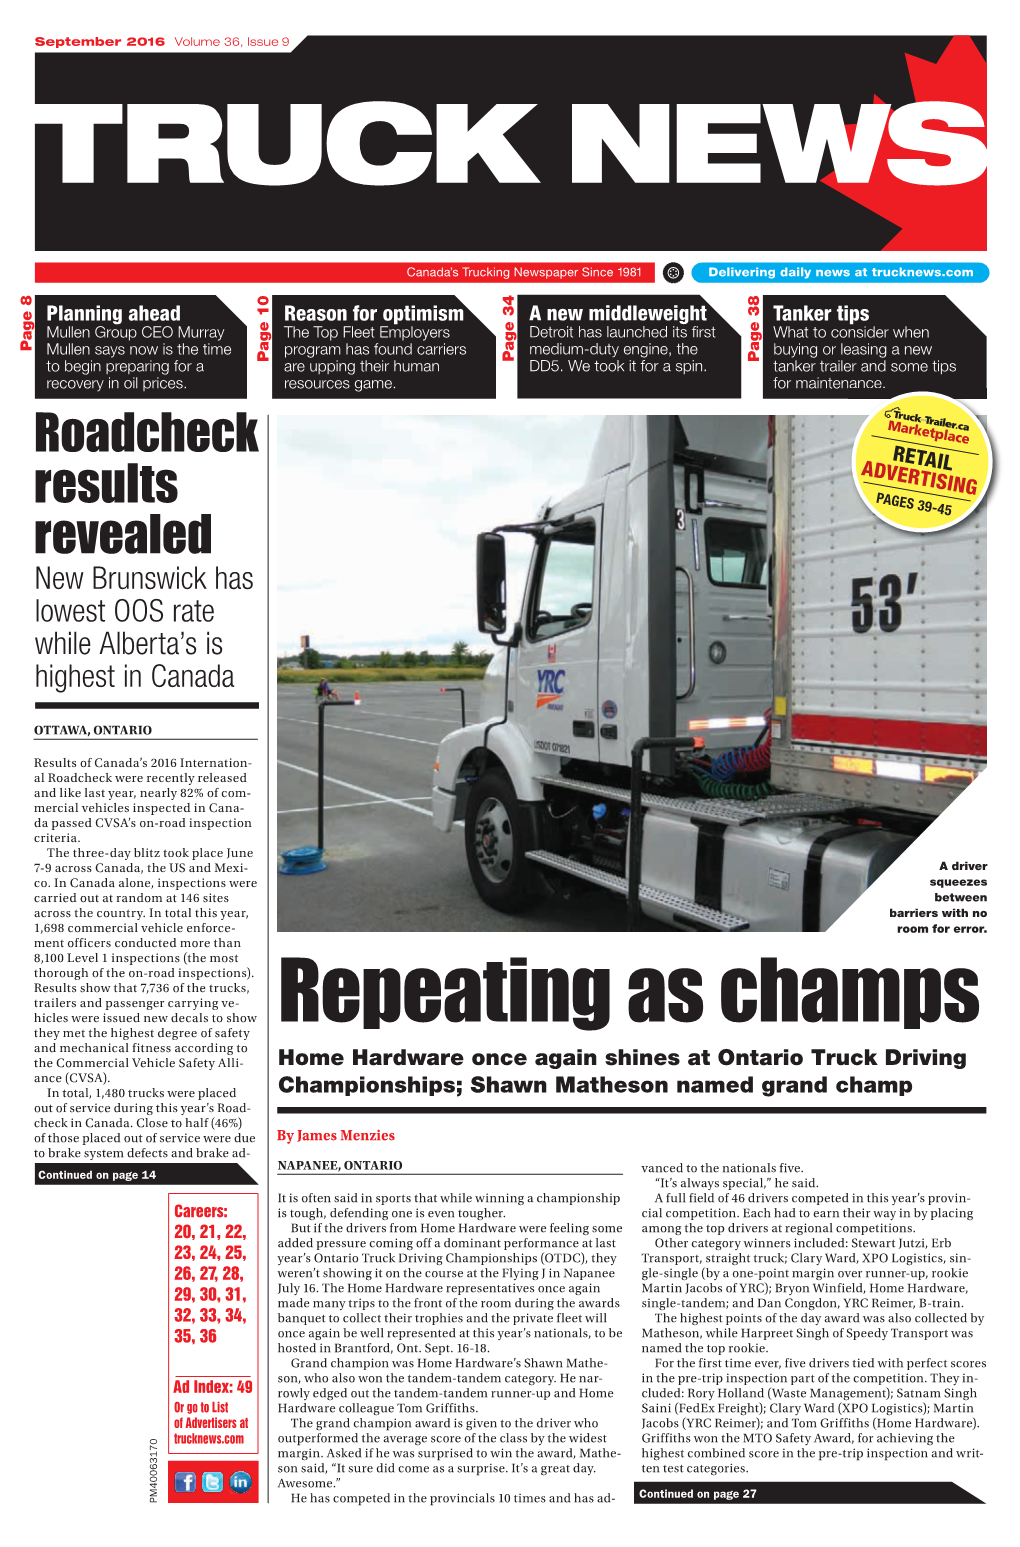 Repeating As Champs and Mechanical Fitness According to the Commercial Vehicle Safety Alli- Home Hardware Once Again Shines at Ontario Truck Driving Ance (CVSA)